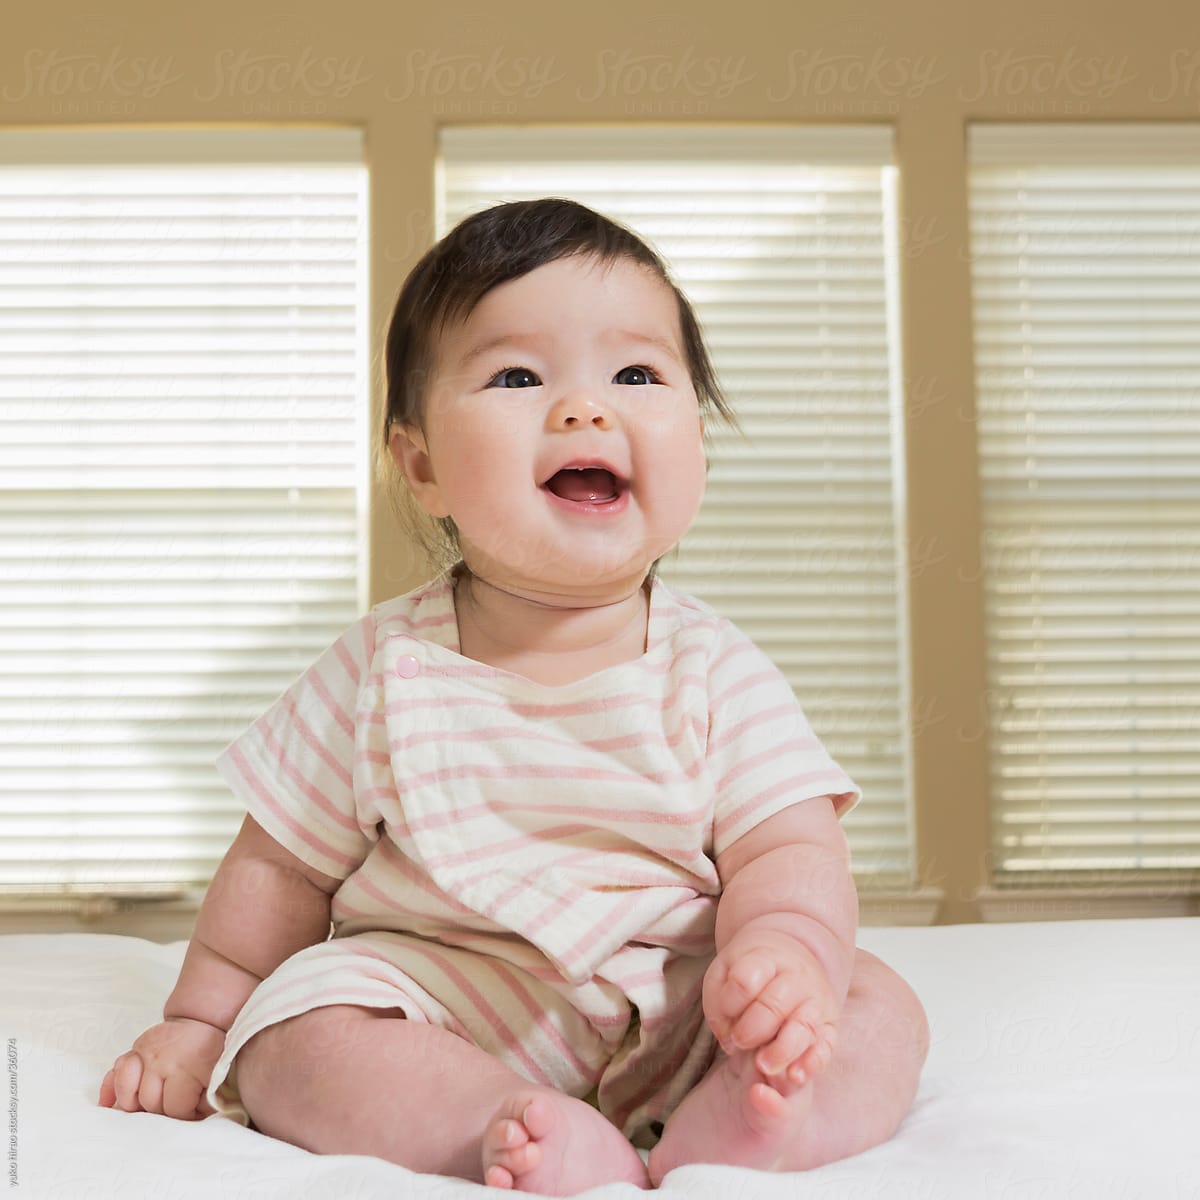 Laughing baby girl portrait